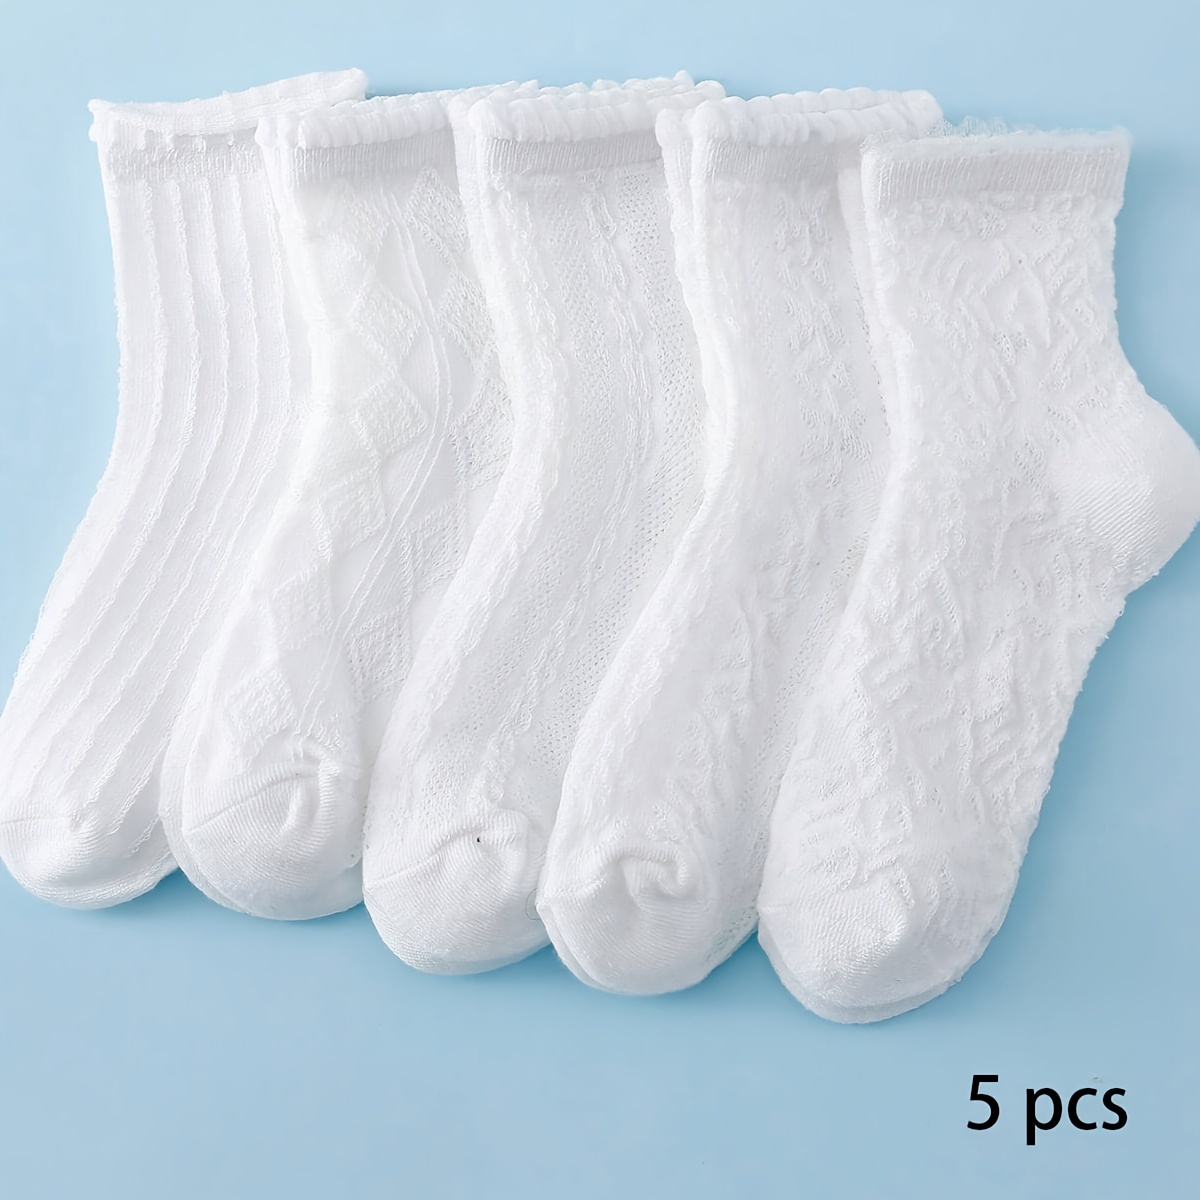 

5 Pairs Of Toddler's Solid Crew Socks, Soft Comfy Breathable Children's Socks For Boys Girls All Seasons Wearing